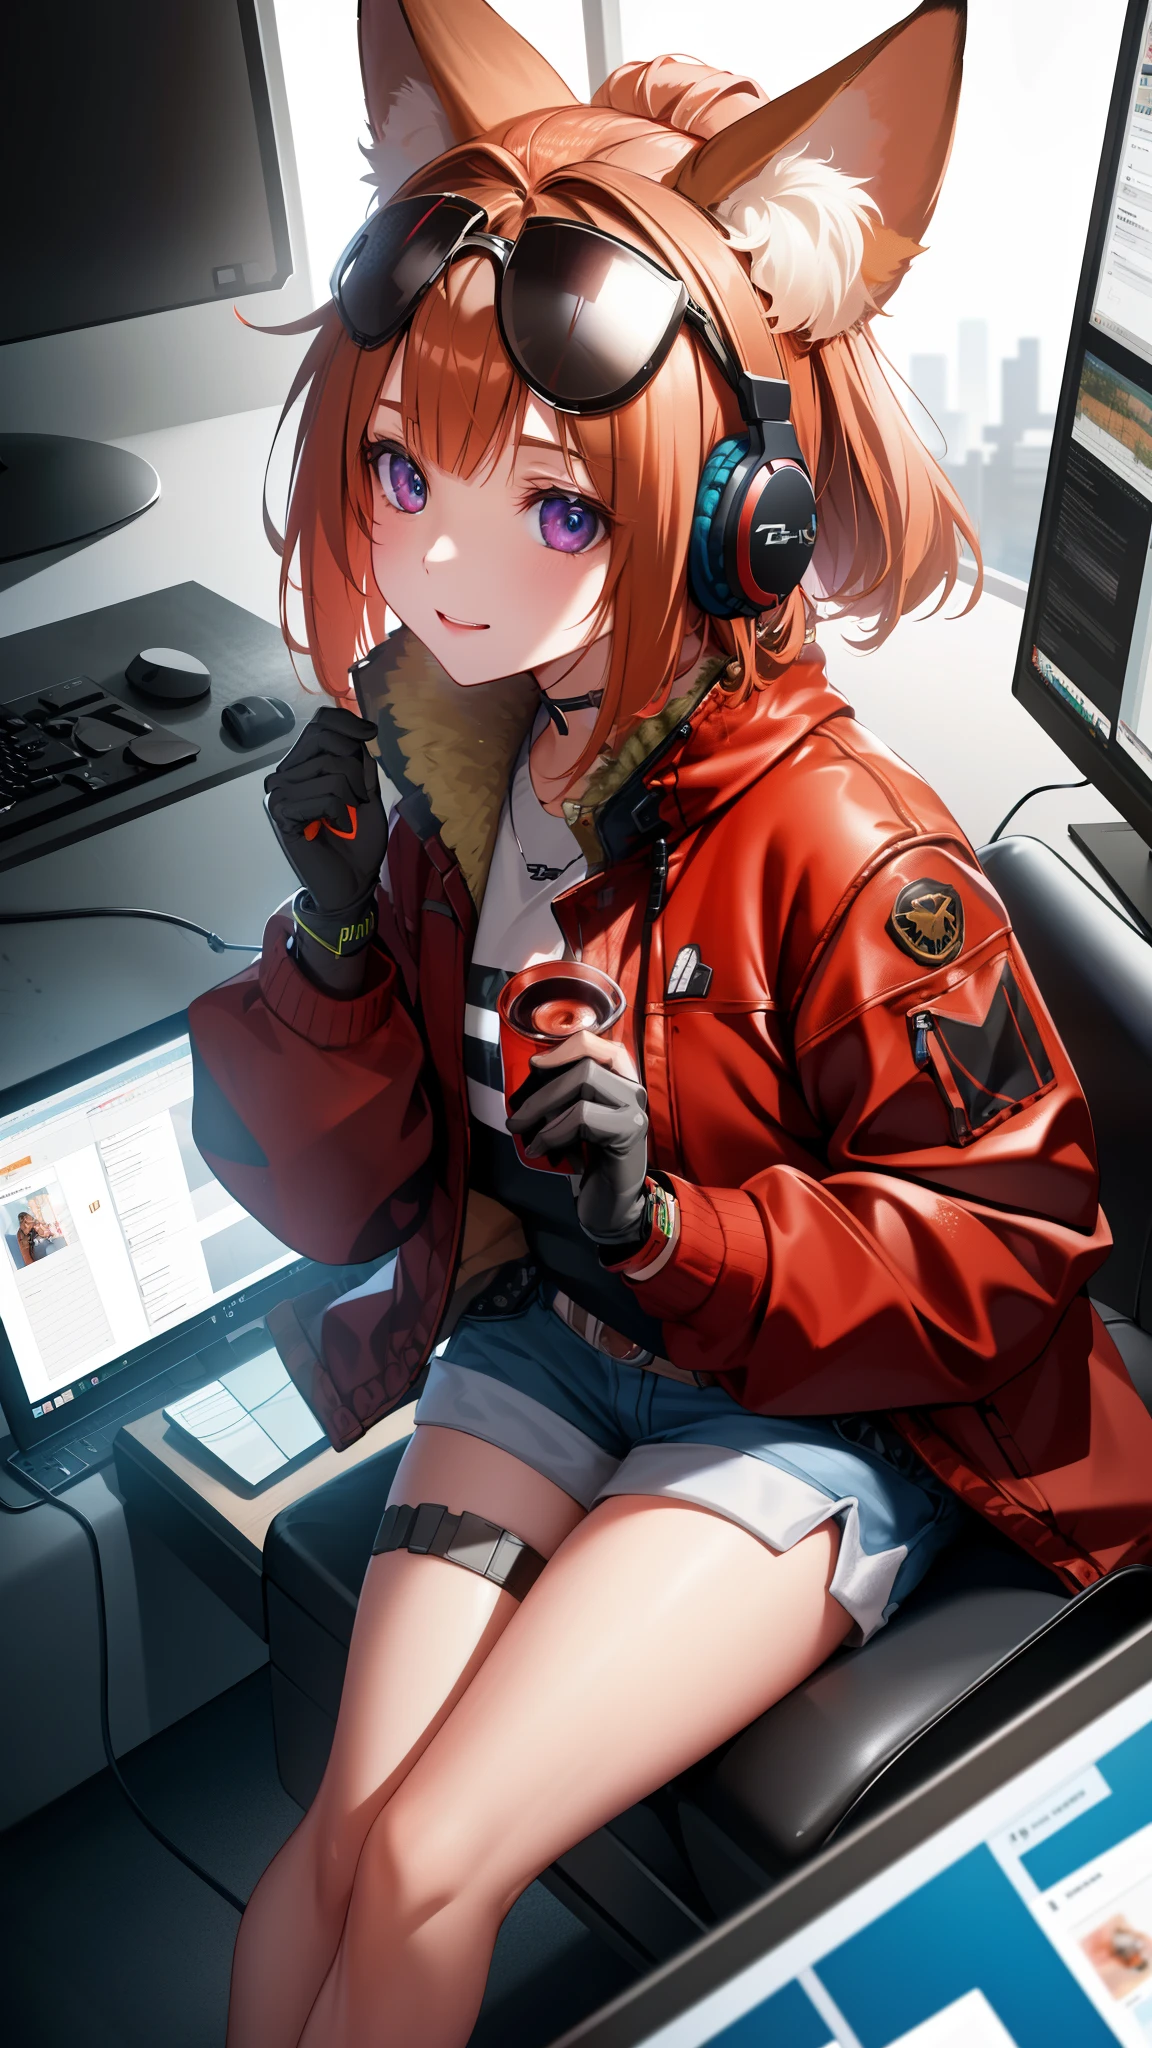 A Q-version of a cute red fox wearing headphones and sitting in front of the computer in the office. High-definition image of cute customer service., Using advanced macro photography technology、The hands are very detailed, sunlight, (blurred background), WLOP, art station, CG settings, concept art, CG settings, octane rendering, Estação Arte fashion trends, art stationHD, art station, 4k, 8K, masterpiece, better quality, Super detailed, expressive eyes.